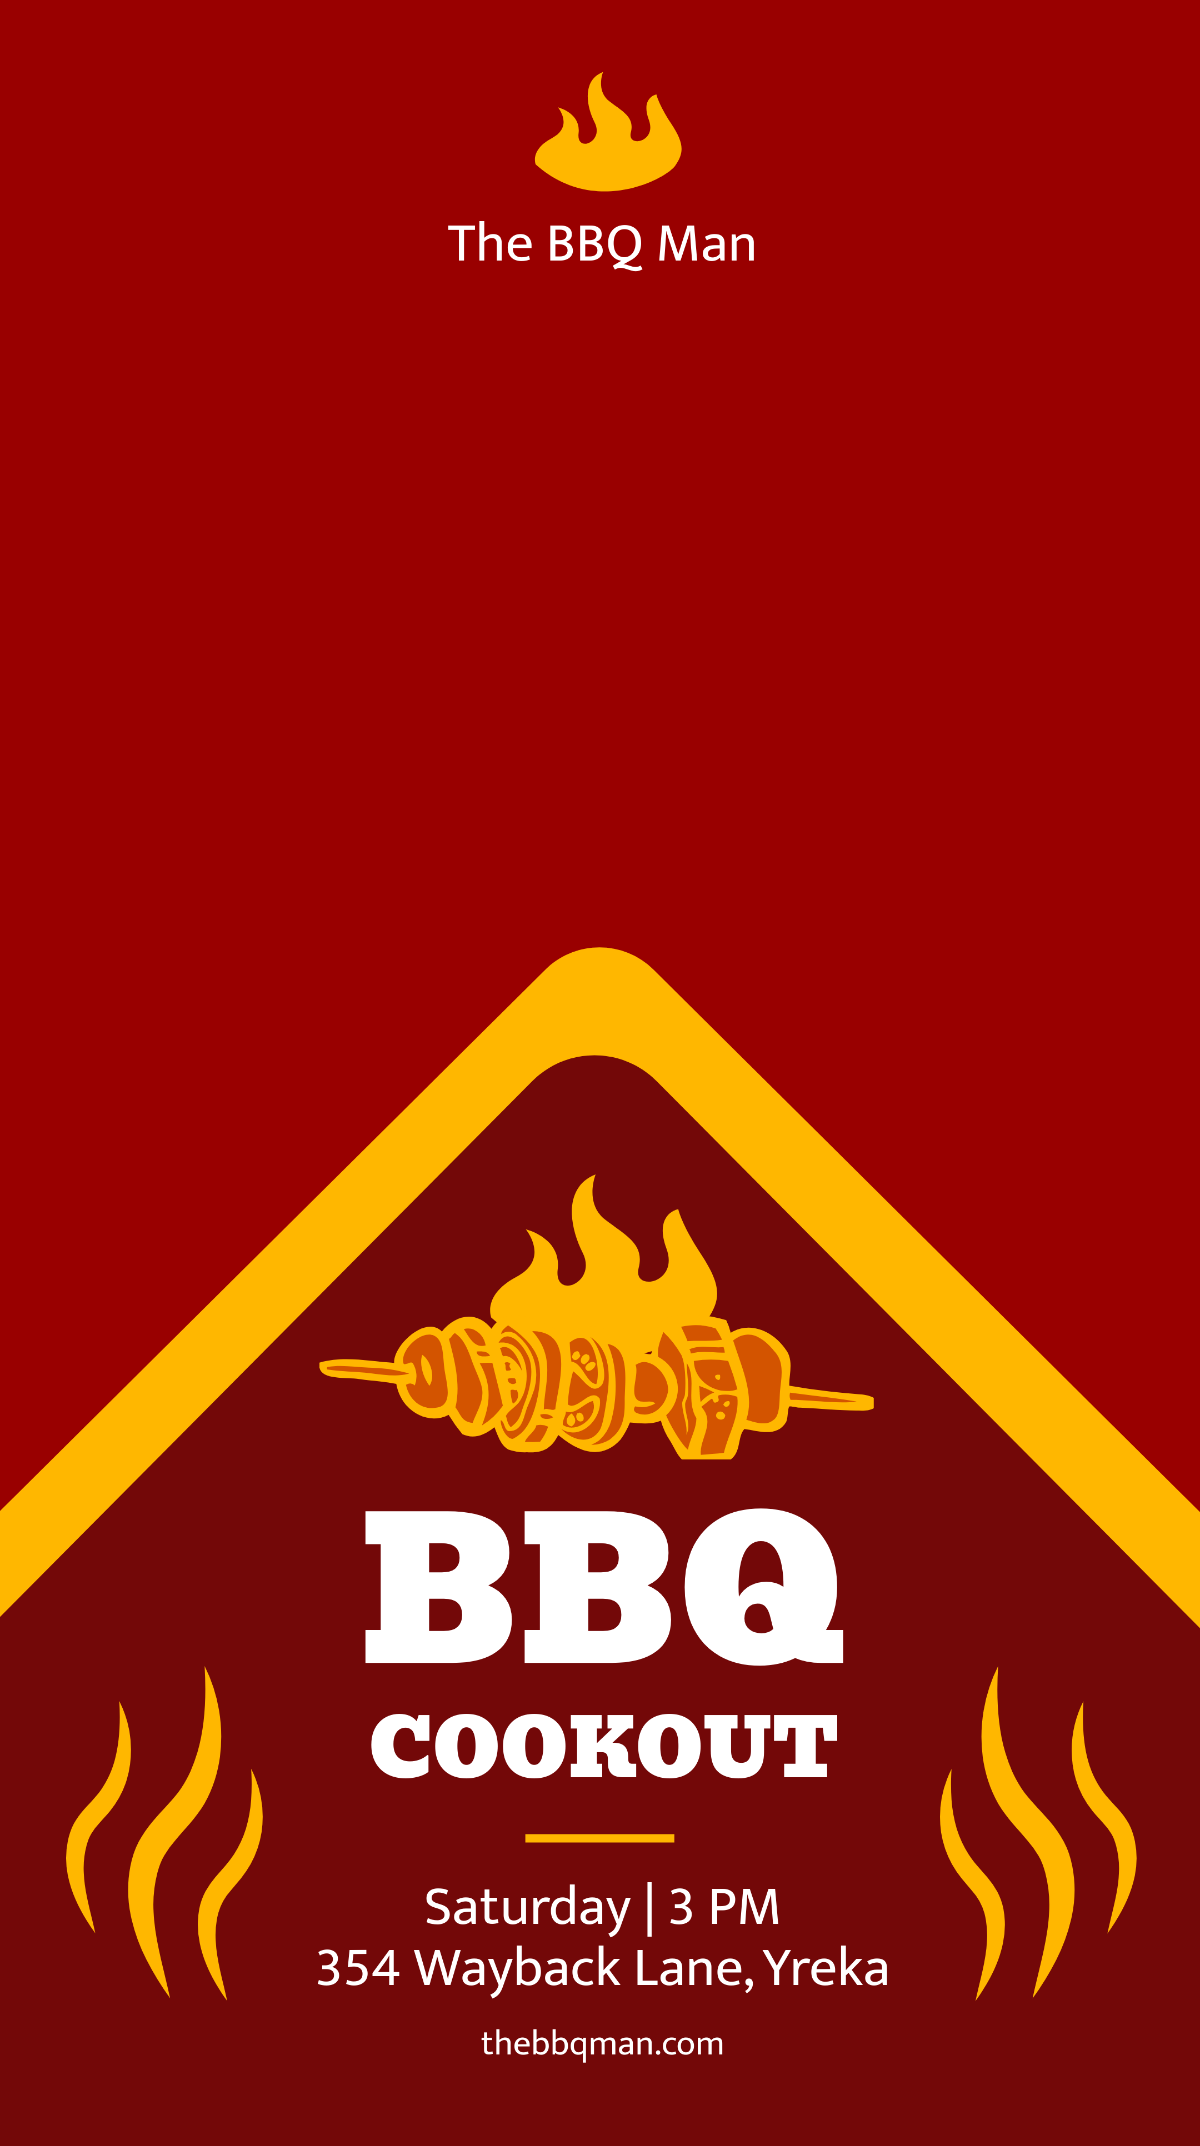 BBQ Cookout Snapchat Geofilter Template